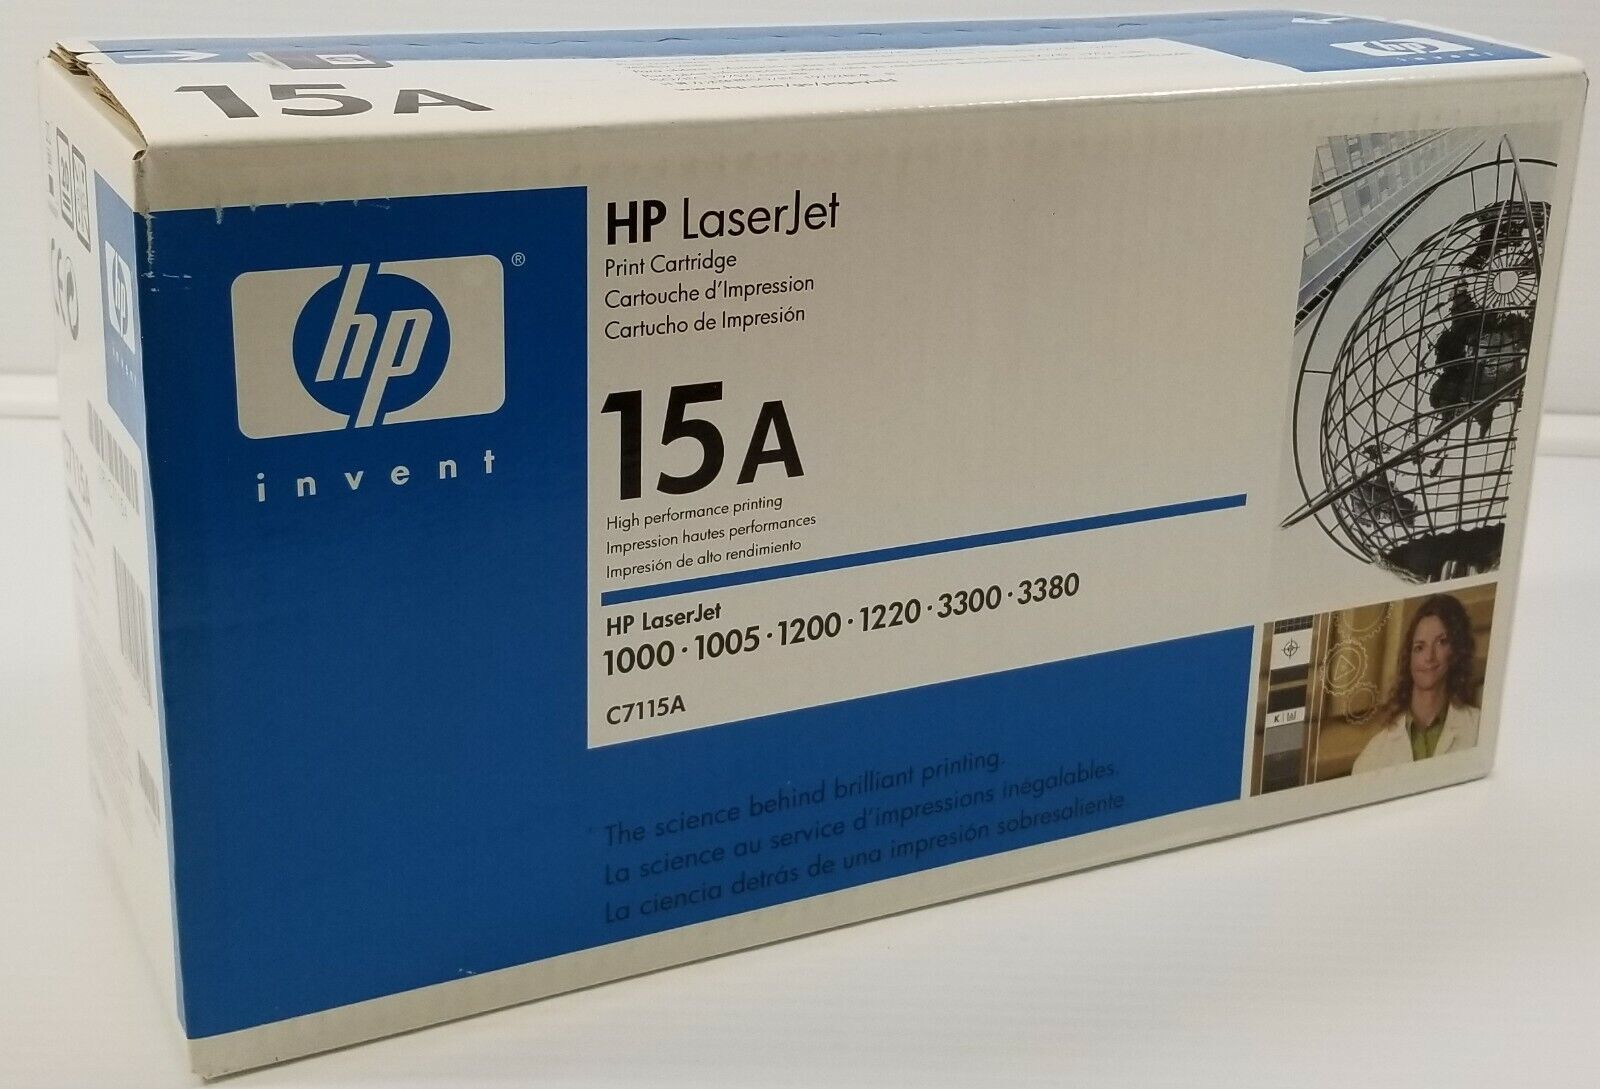 Primary image for *D) HP LaserJet 1000 1005 1200 1220 3300 3380 Print Cartridge 15A C7115A